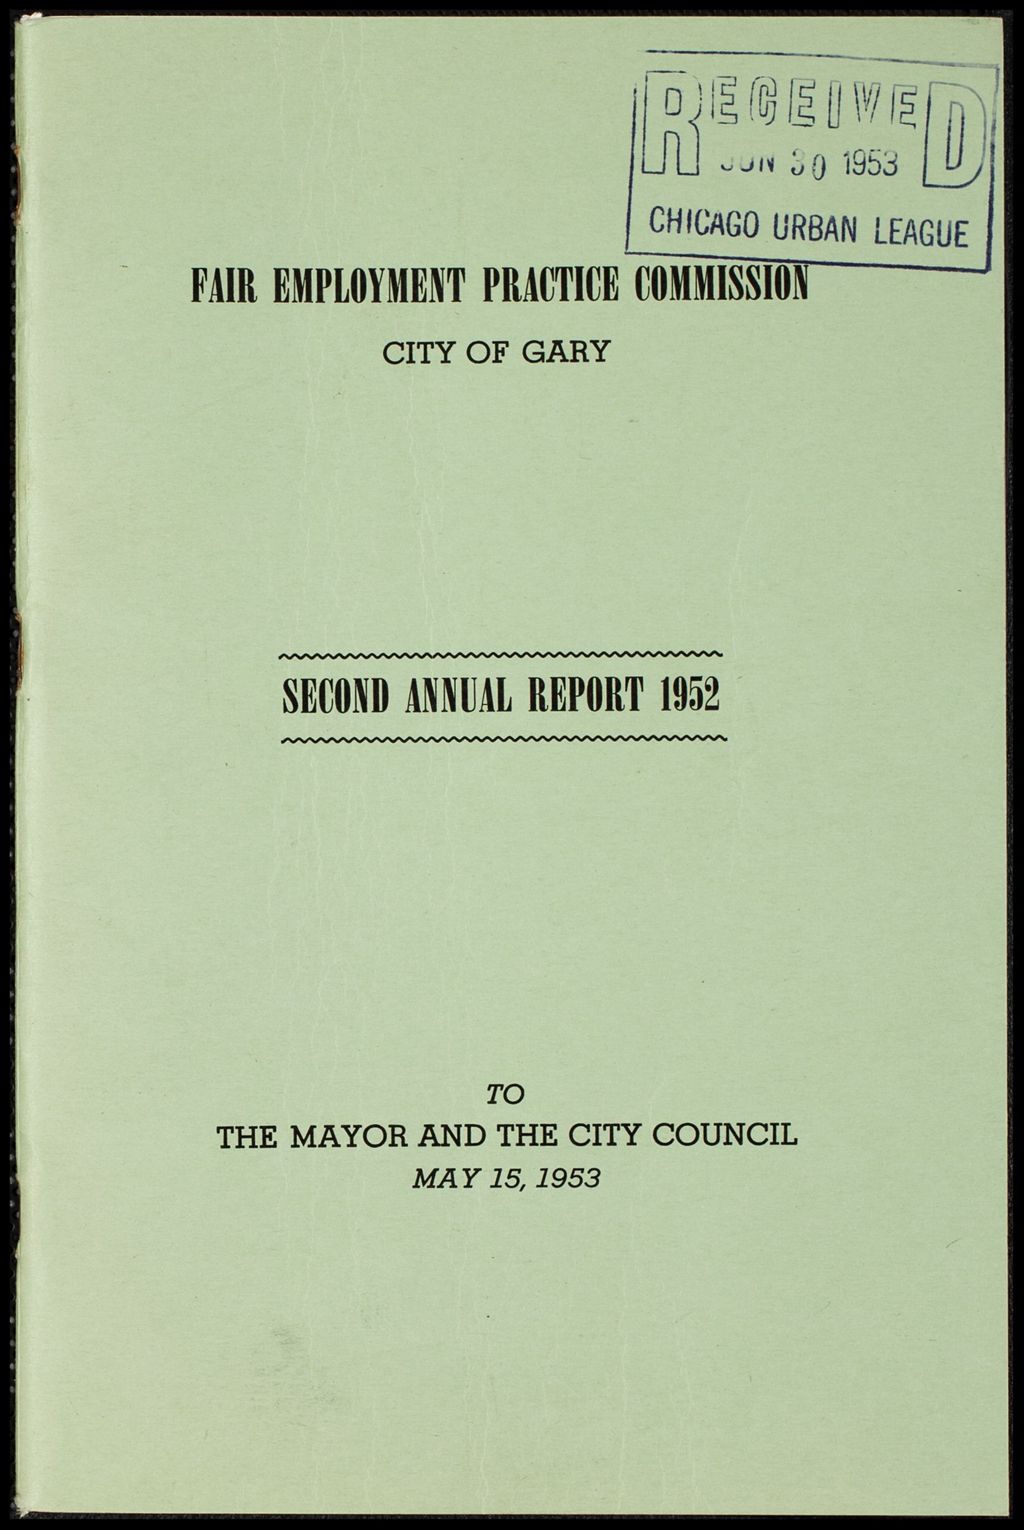 Miniature of Gary, Indiana Fair Employment Practice Commission annual reports, 1953 (Folder I-2712)